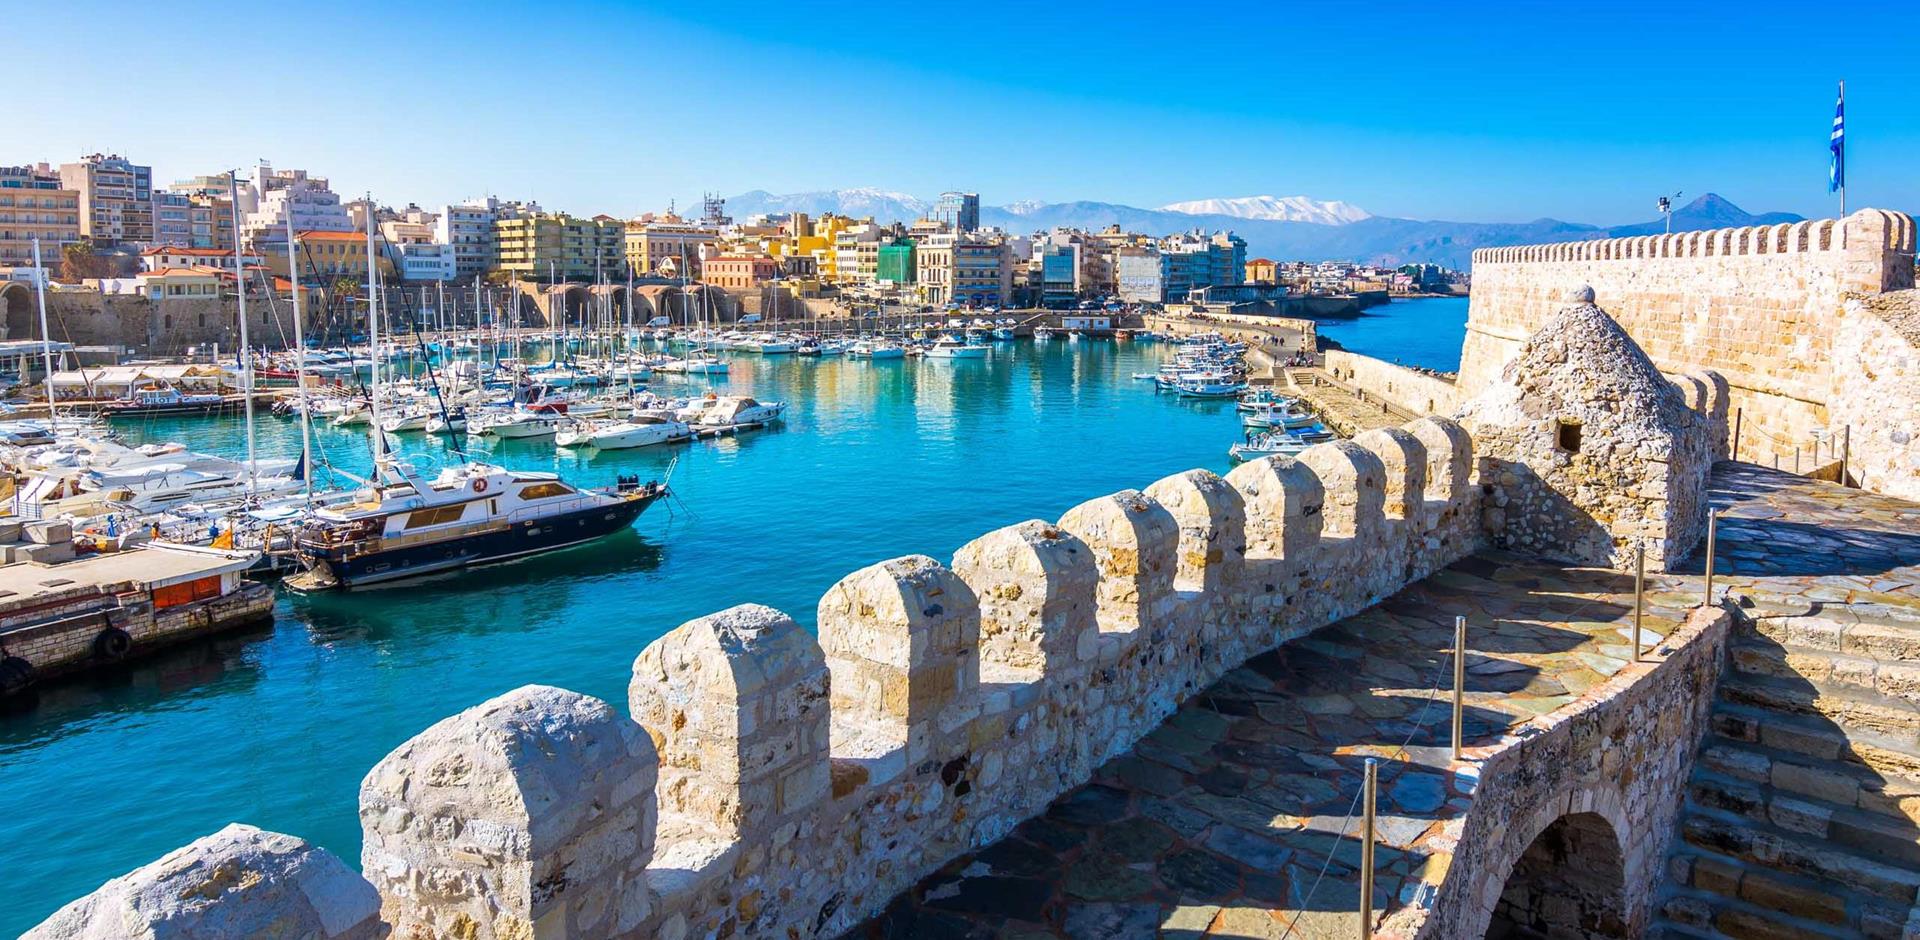 Heraklion harbour with old venetian fort Koule and shipyards, Crete